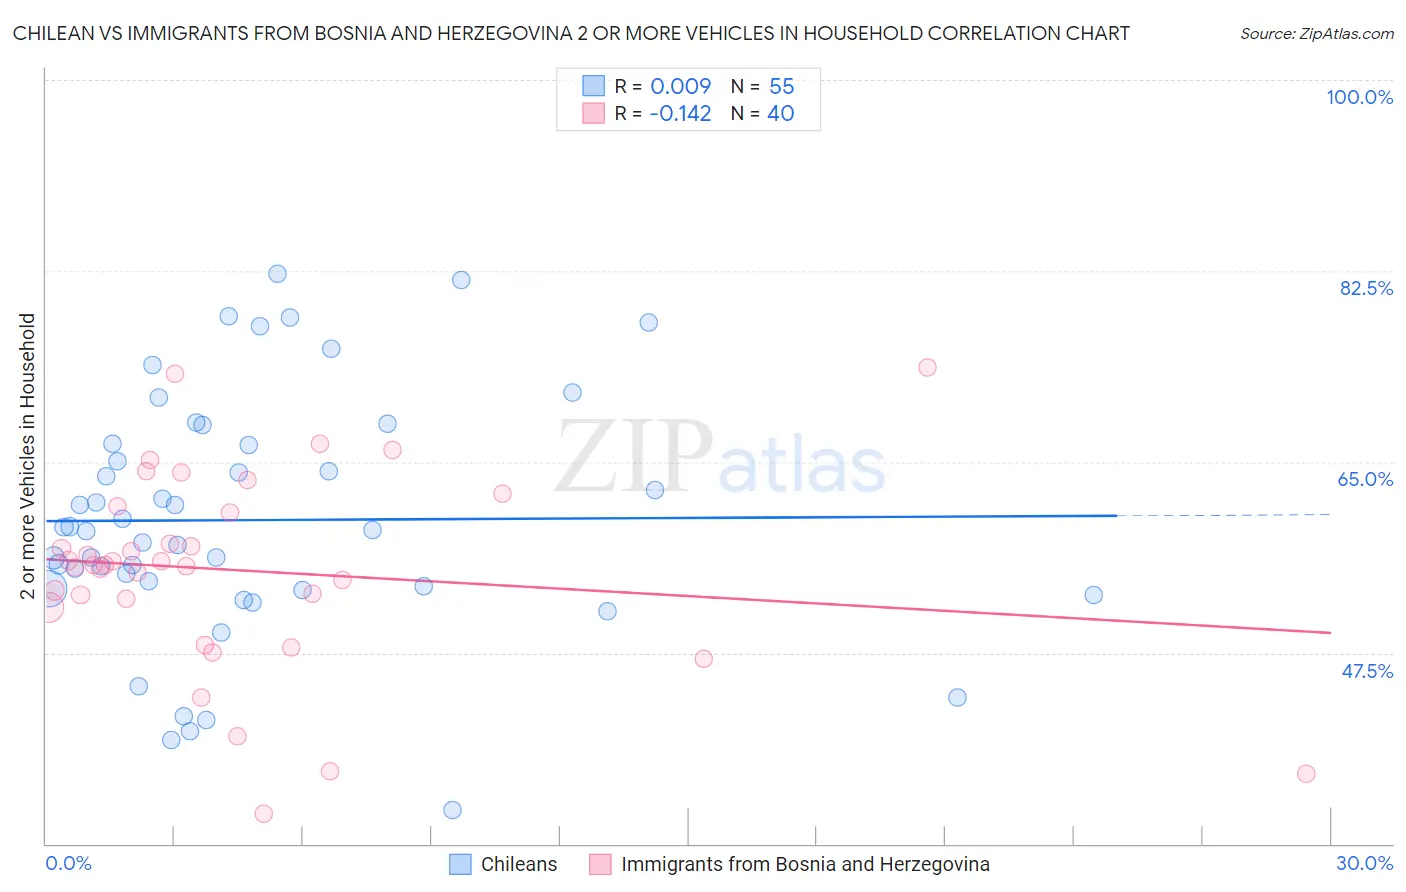 Chilean vs Immigrants from Bosnia and Herzegovina 2 or more Vehicles in Household